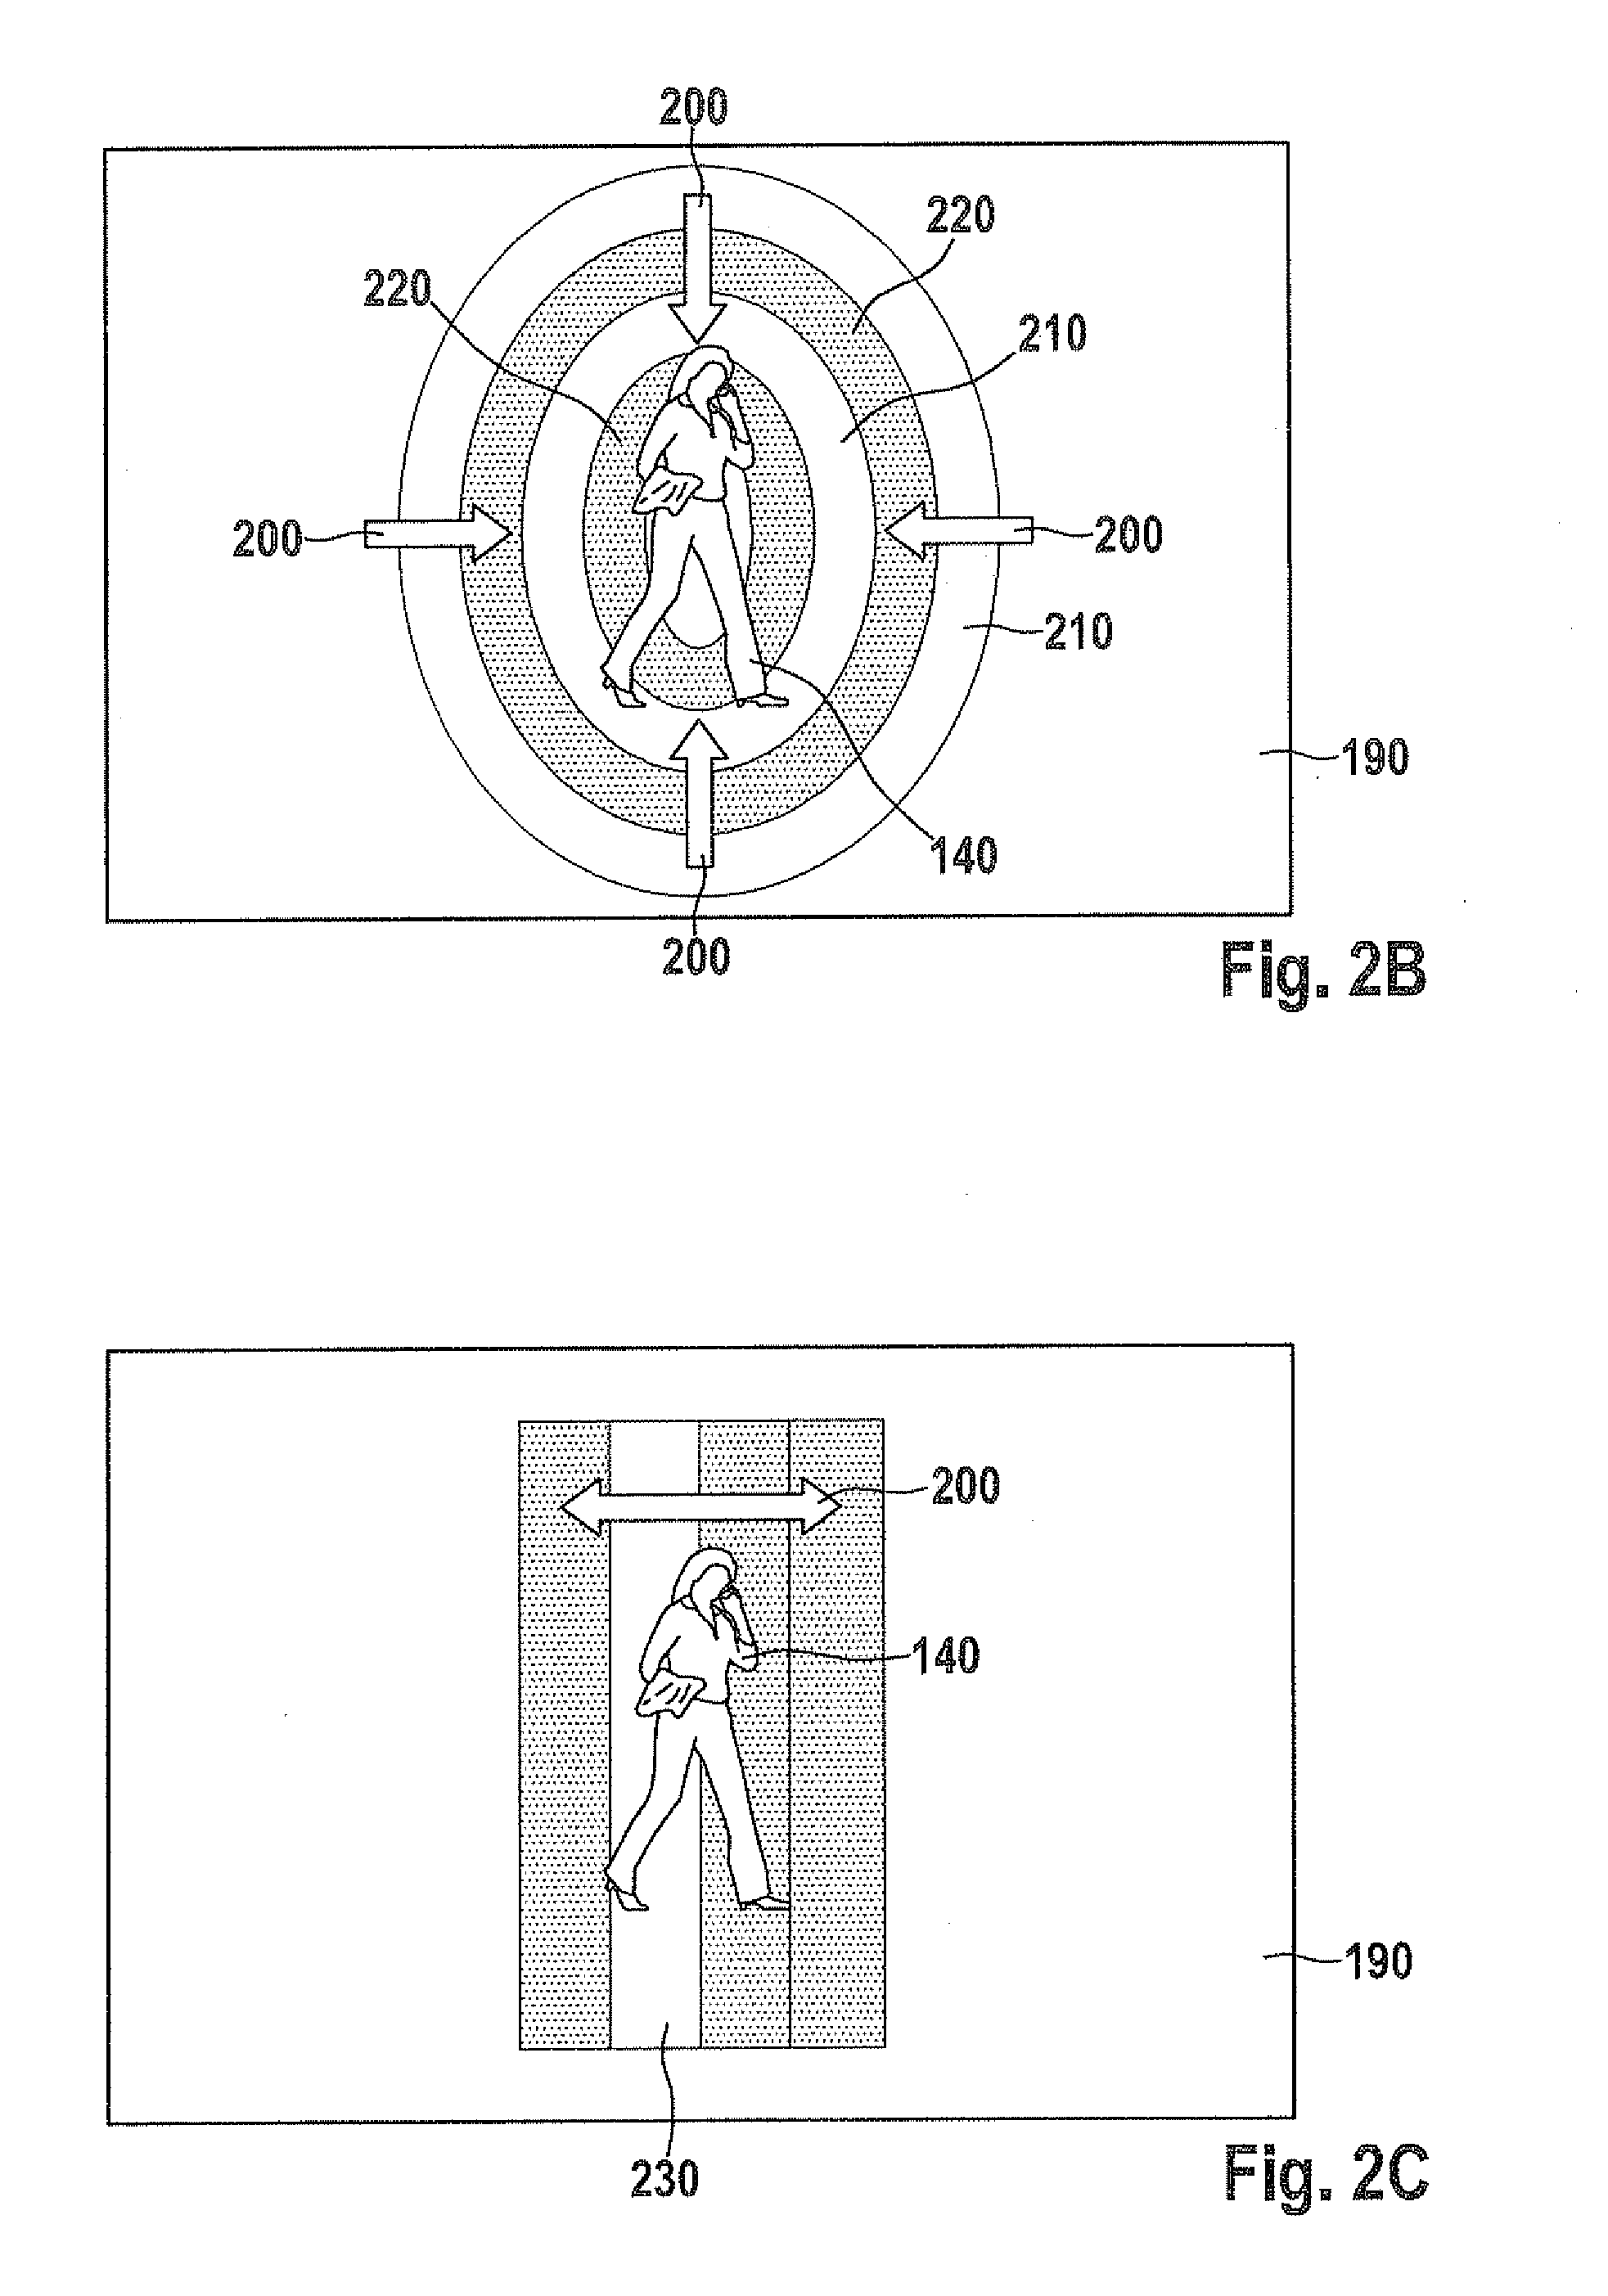 Method and device for changing a light emission of at least one headlight of a vehicle